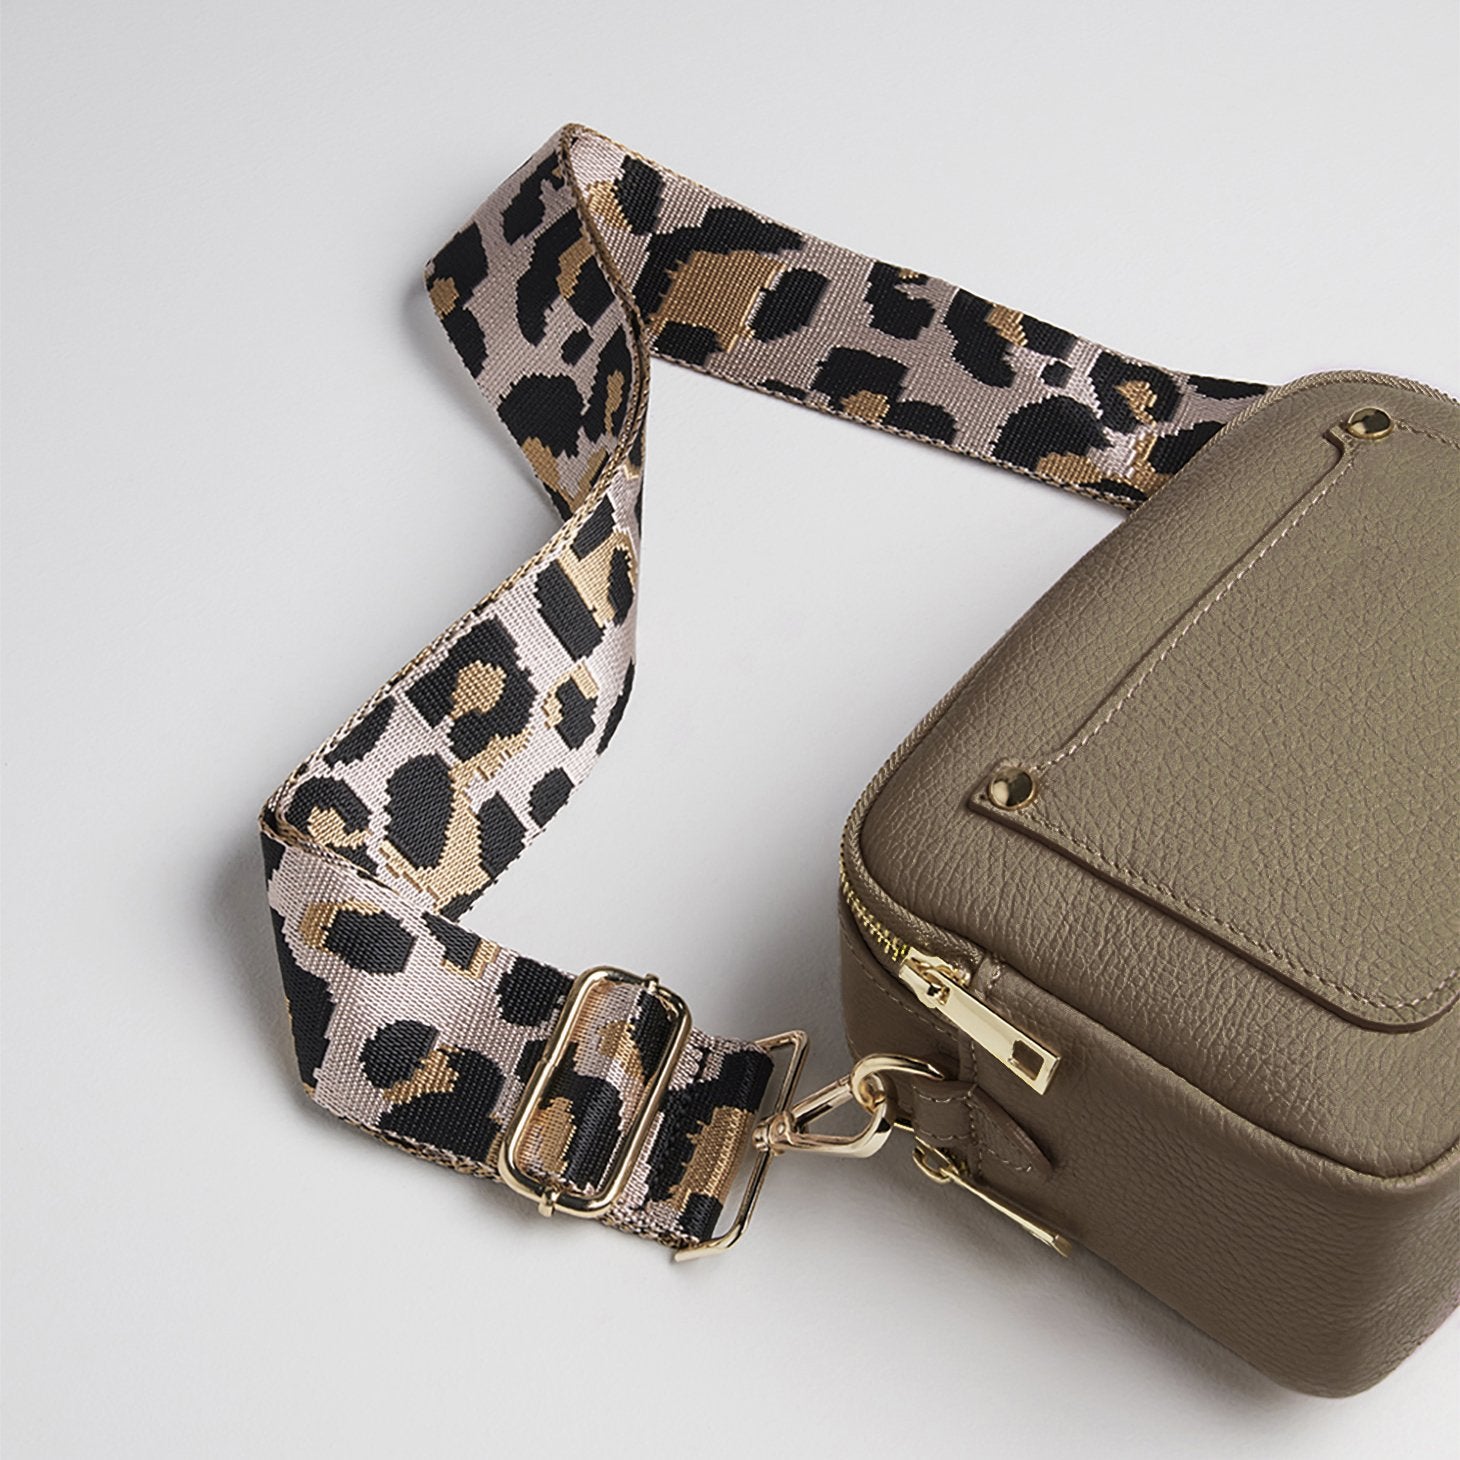 Sienna Crossbody Bag in Dark Taupe With Light Pink Leopard Strap